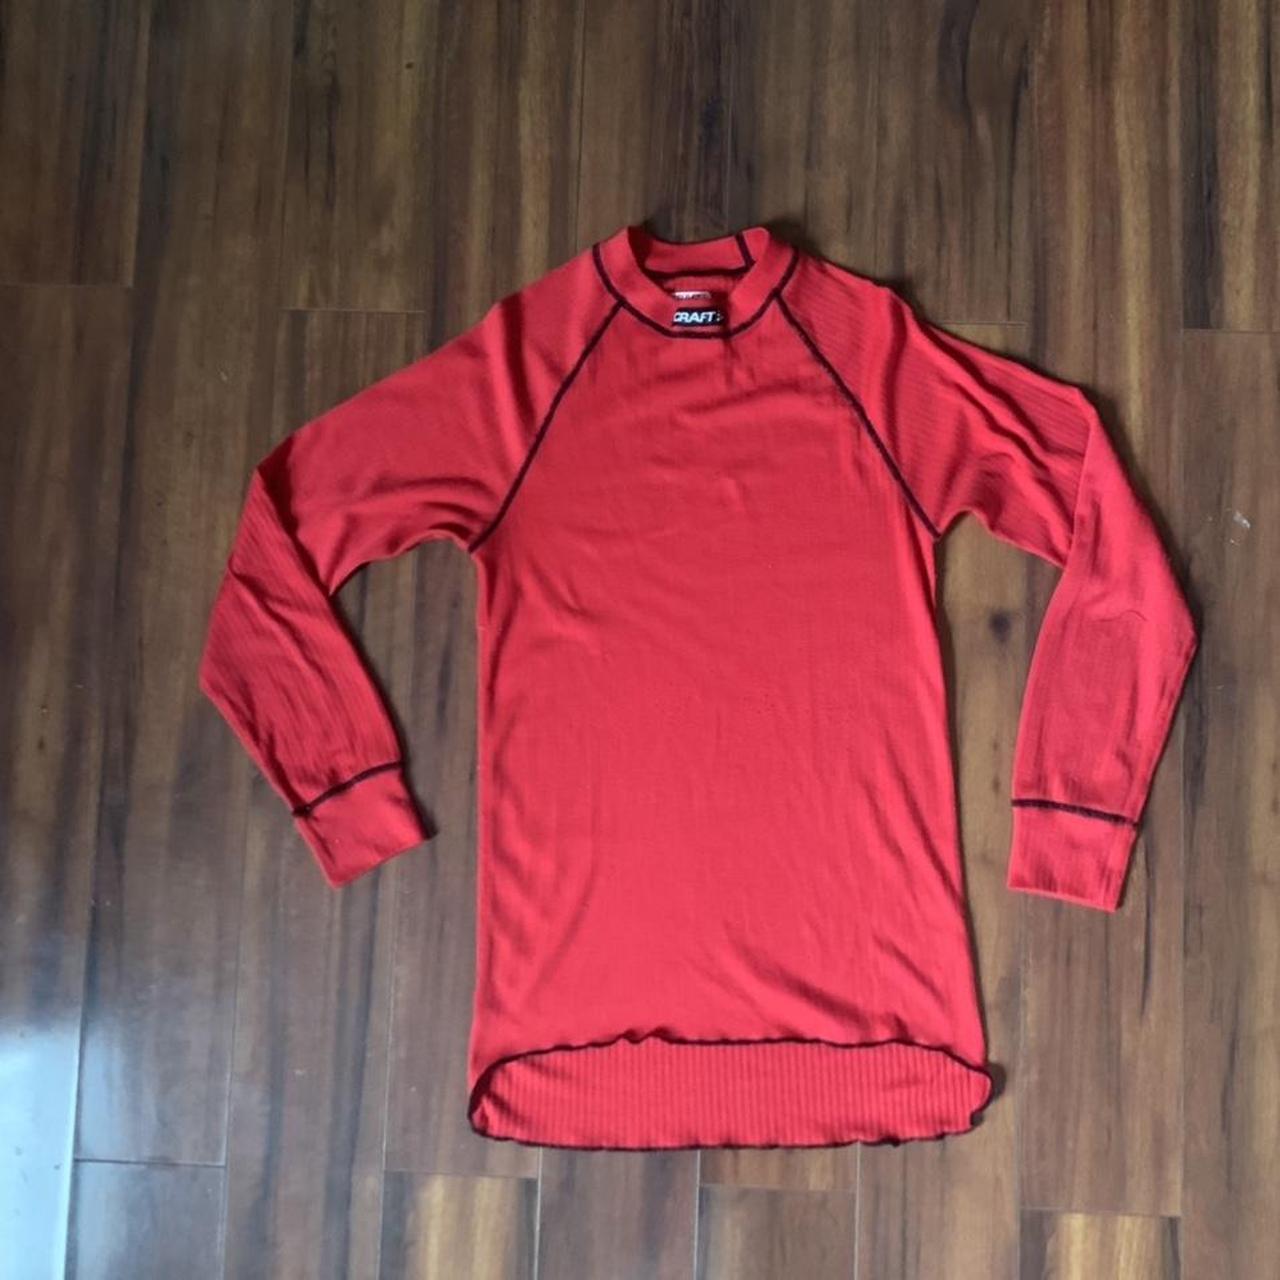 item listed by thefiensthriftshop